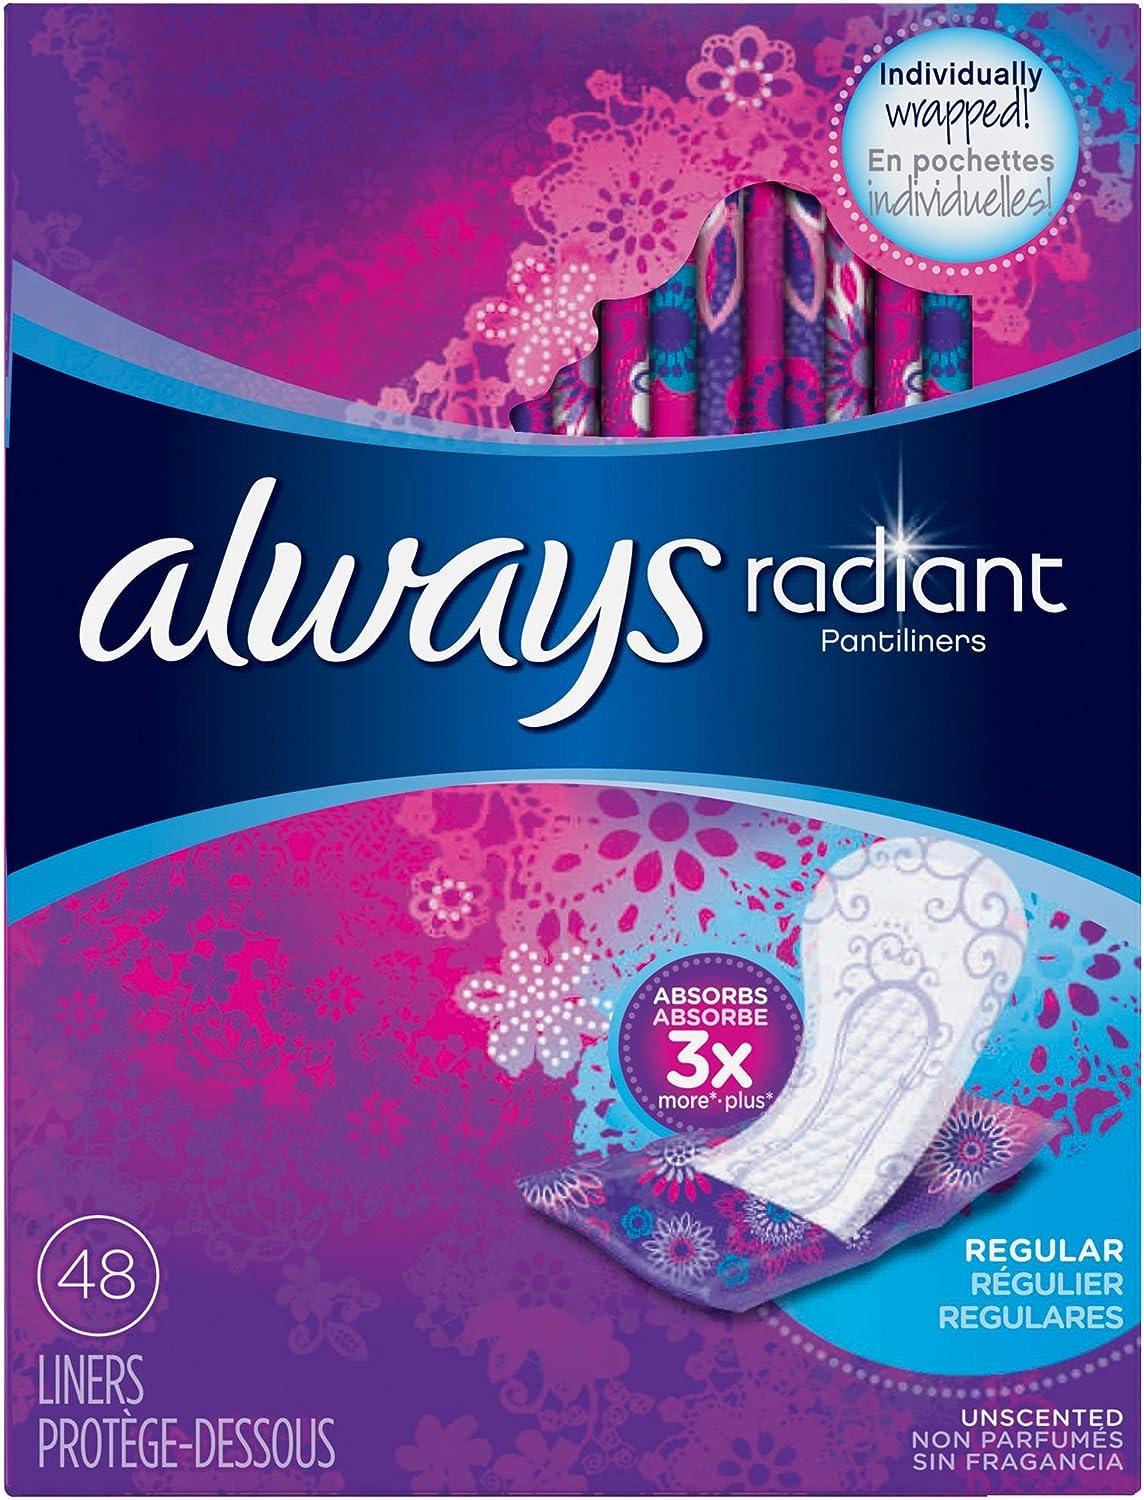 Always Radiant Pantiliners, Regular, Unscented, 96 Liners (Pack of